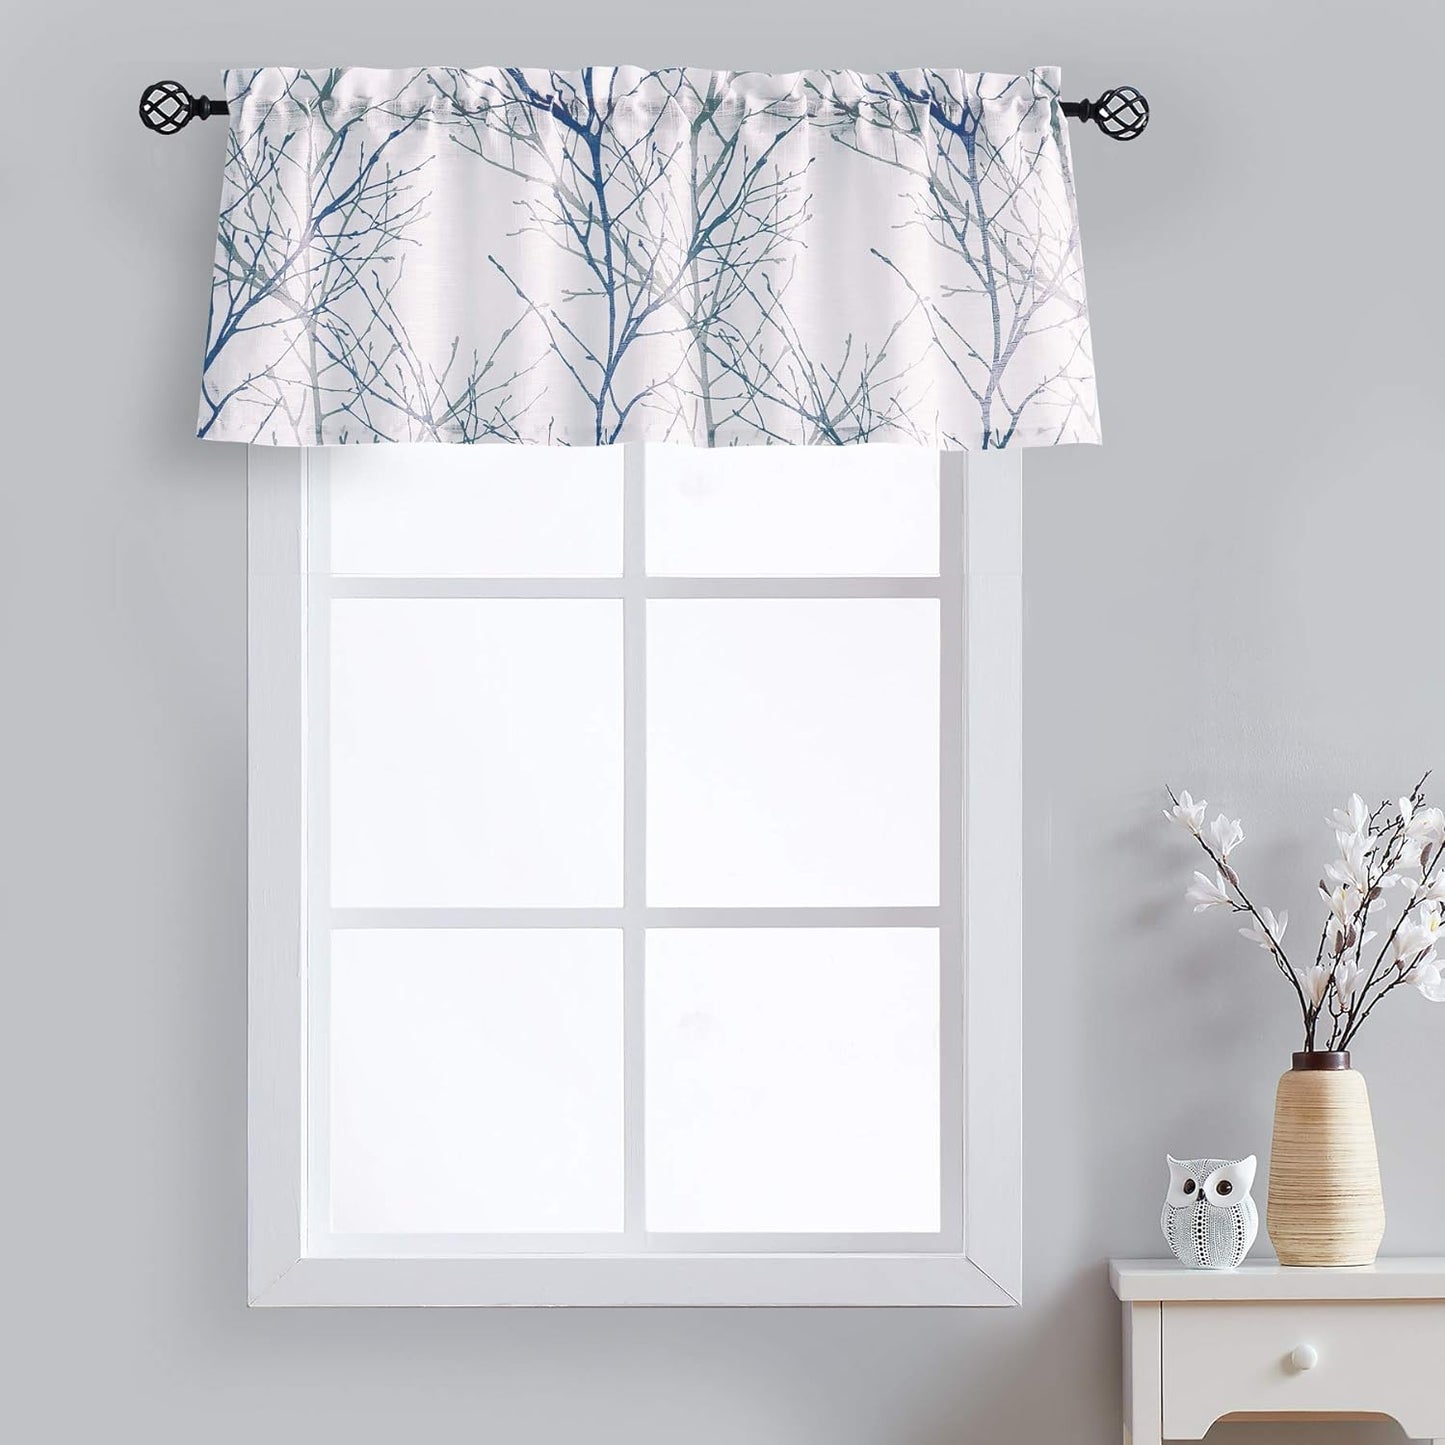 FMFUNCTEX Blue White Curtains for Kitchen Living Room 72“ Grey Tree Branches Print Curtain Set for Small Windows Linen Textured Semi-Sheer Drapes for Bedroom Grommet Top, 2 Panels  Fmfunctex Blue 50" X 18" 1Pc 